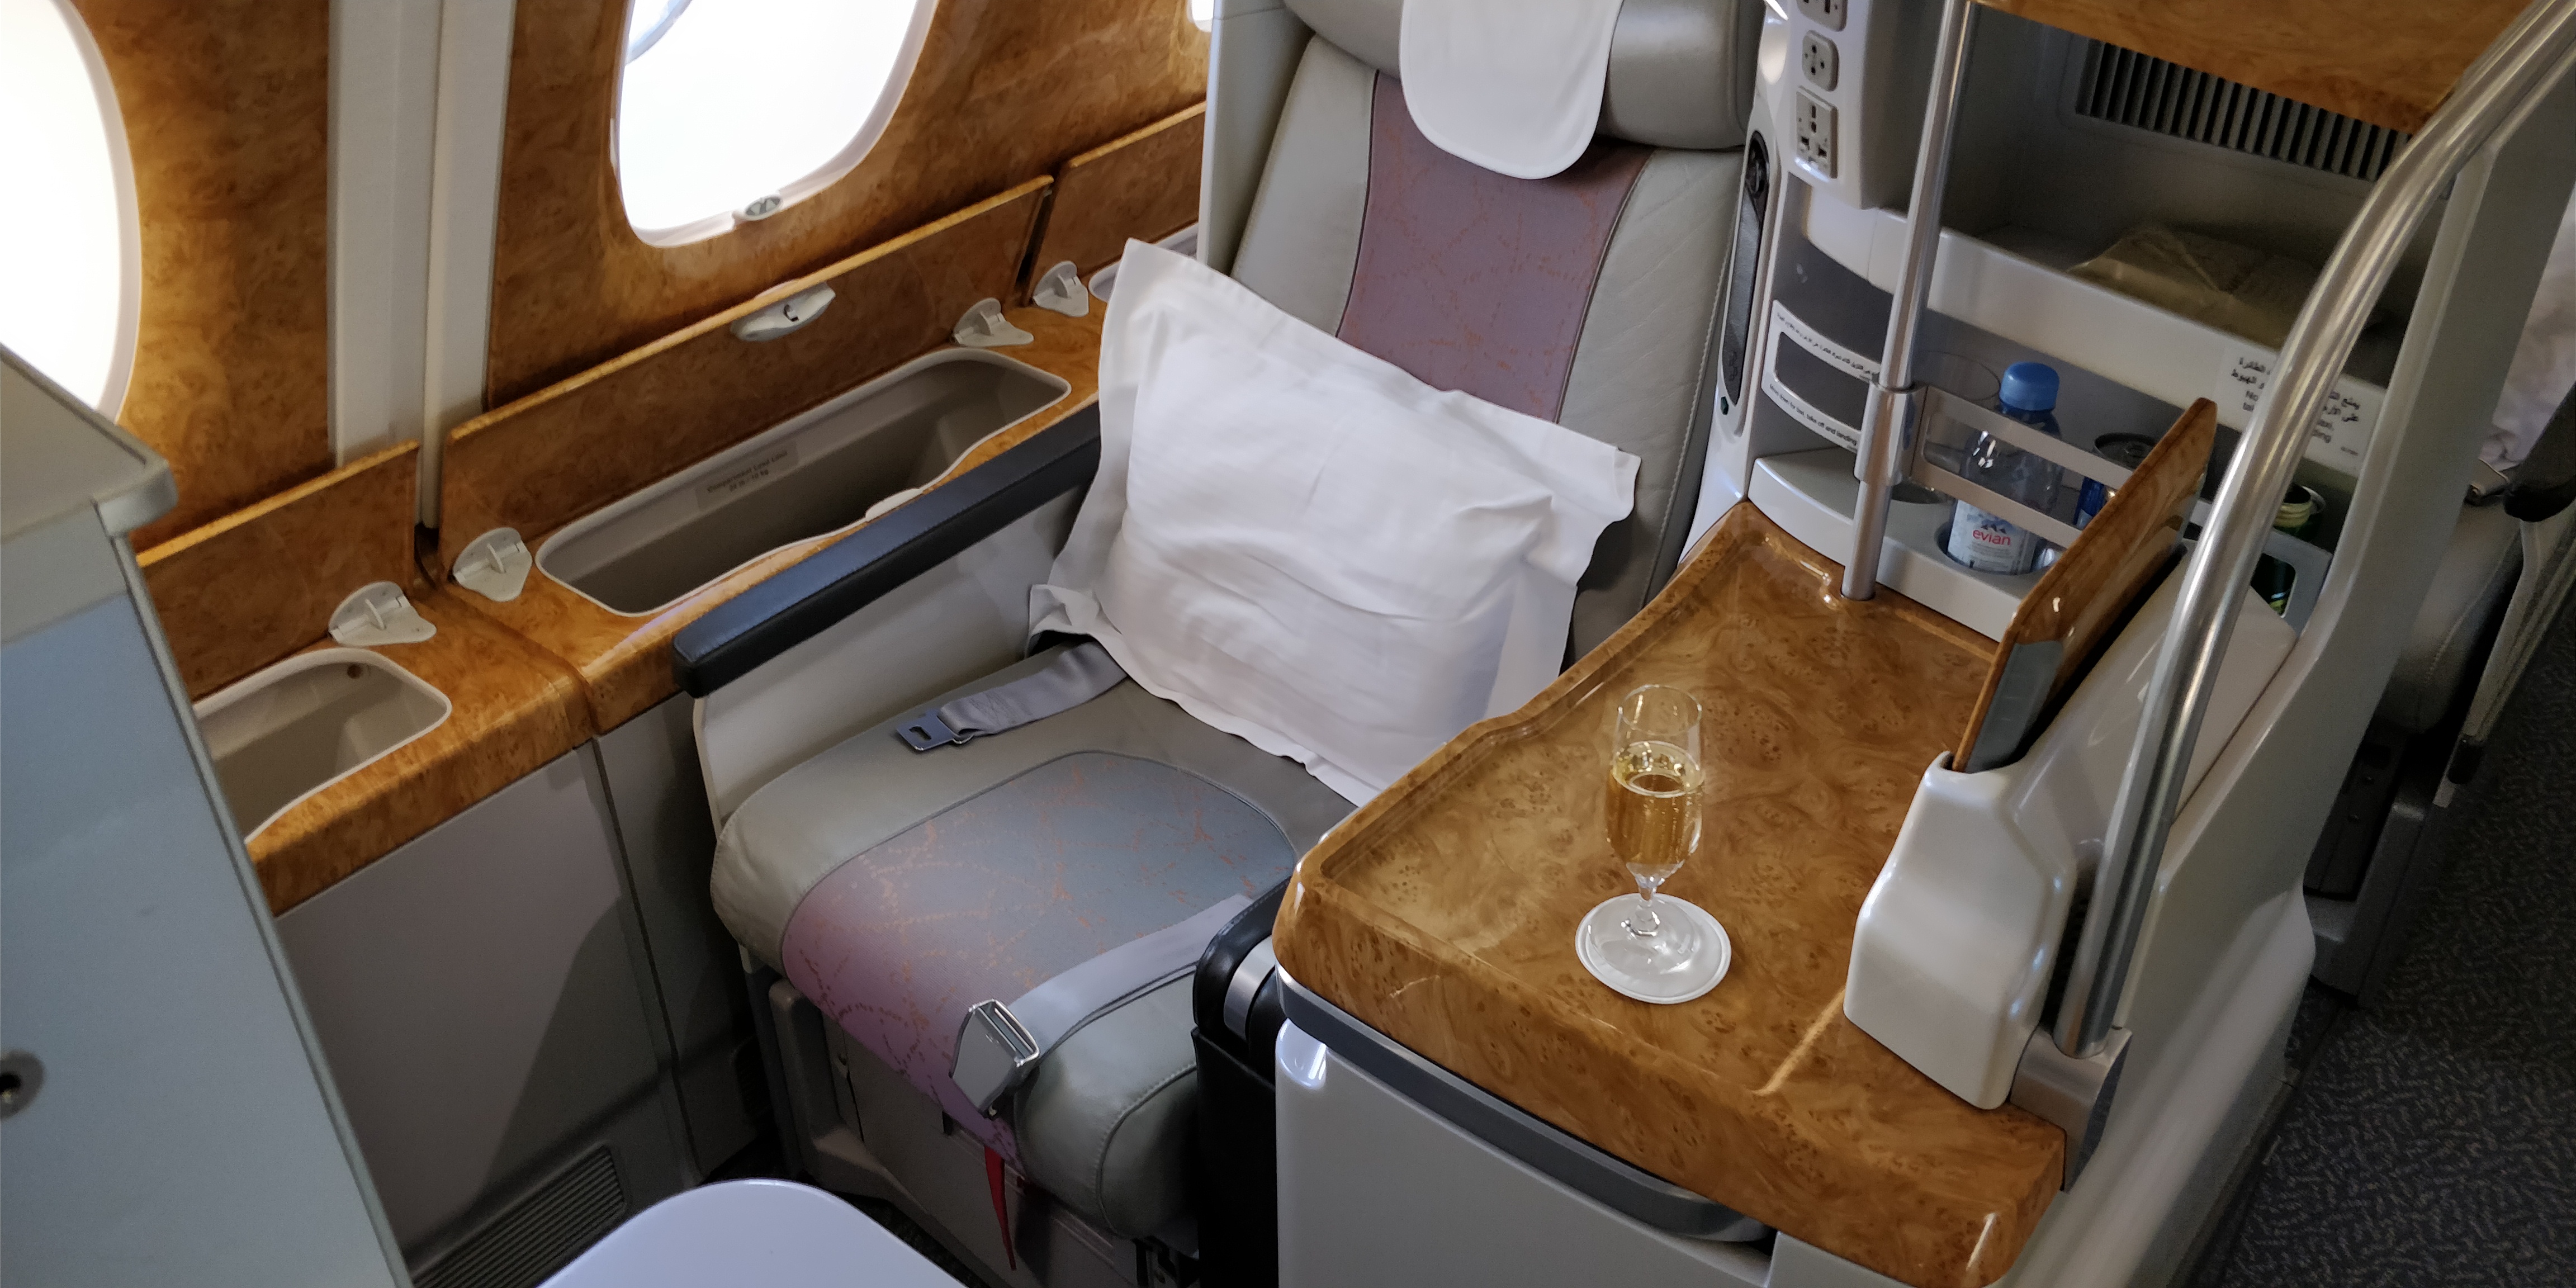 A picture ofEMIRATES 380-800 BUSINESS CLASS SEAT on flight EK405 